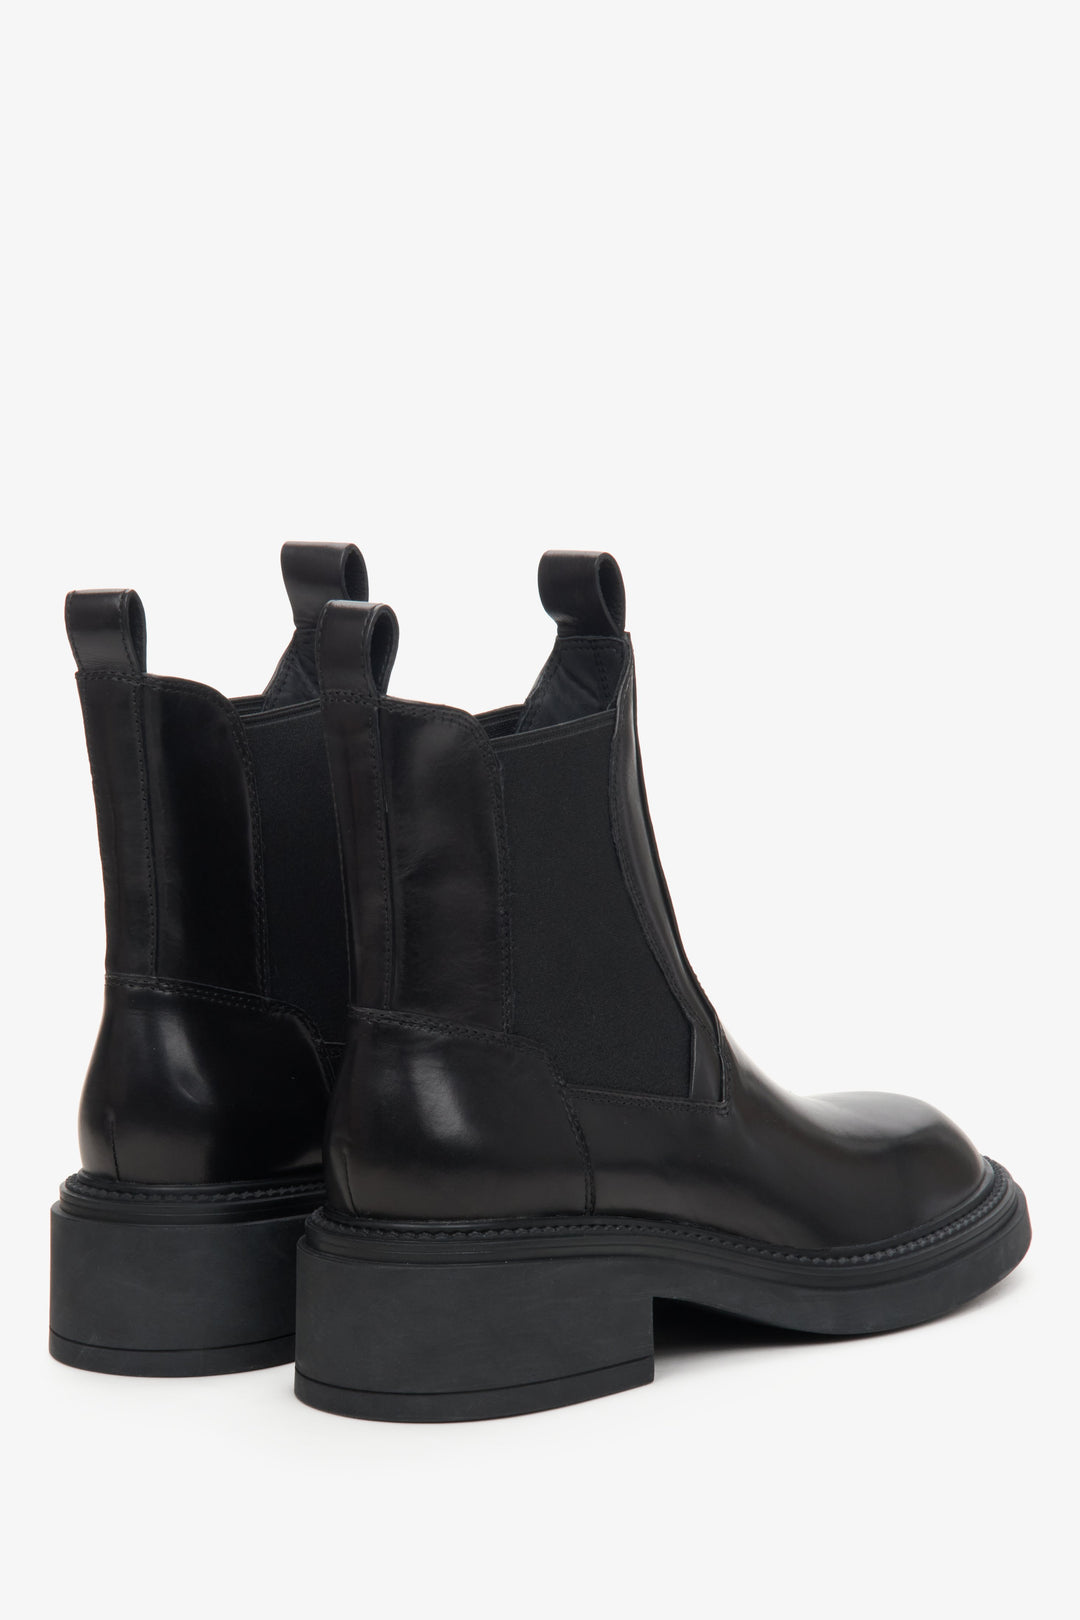 Women's black leather Chelsea boots - a close-up on shoes' heel counter